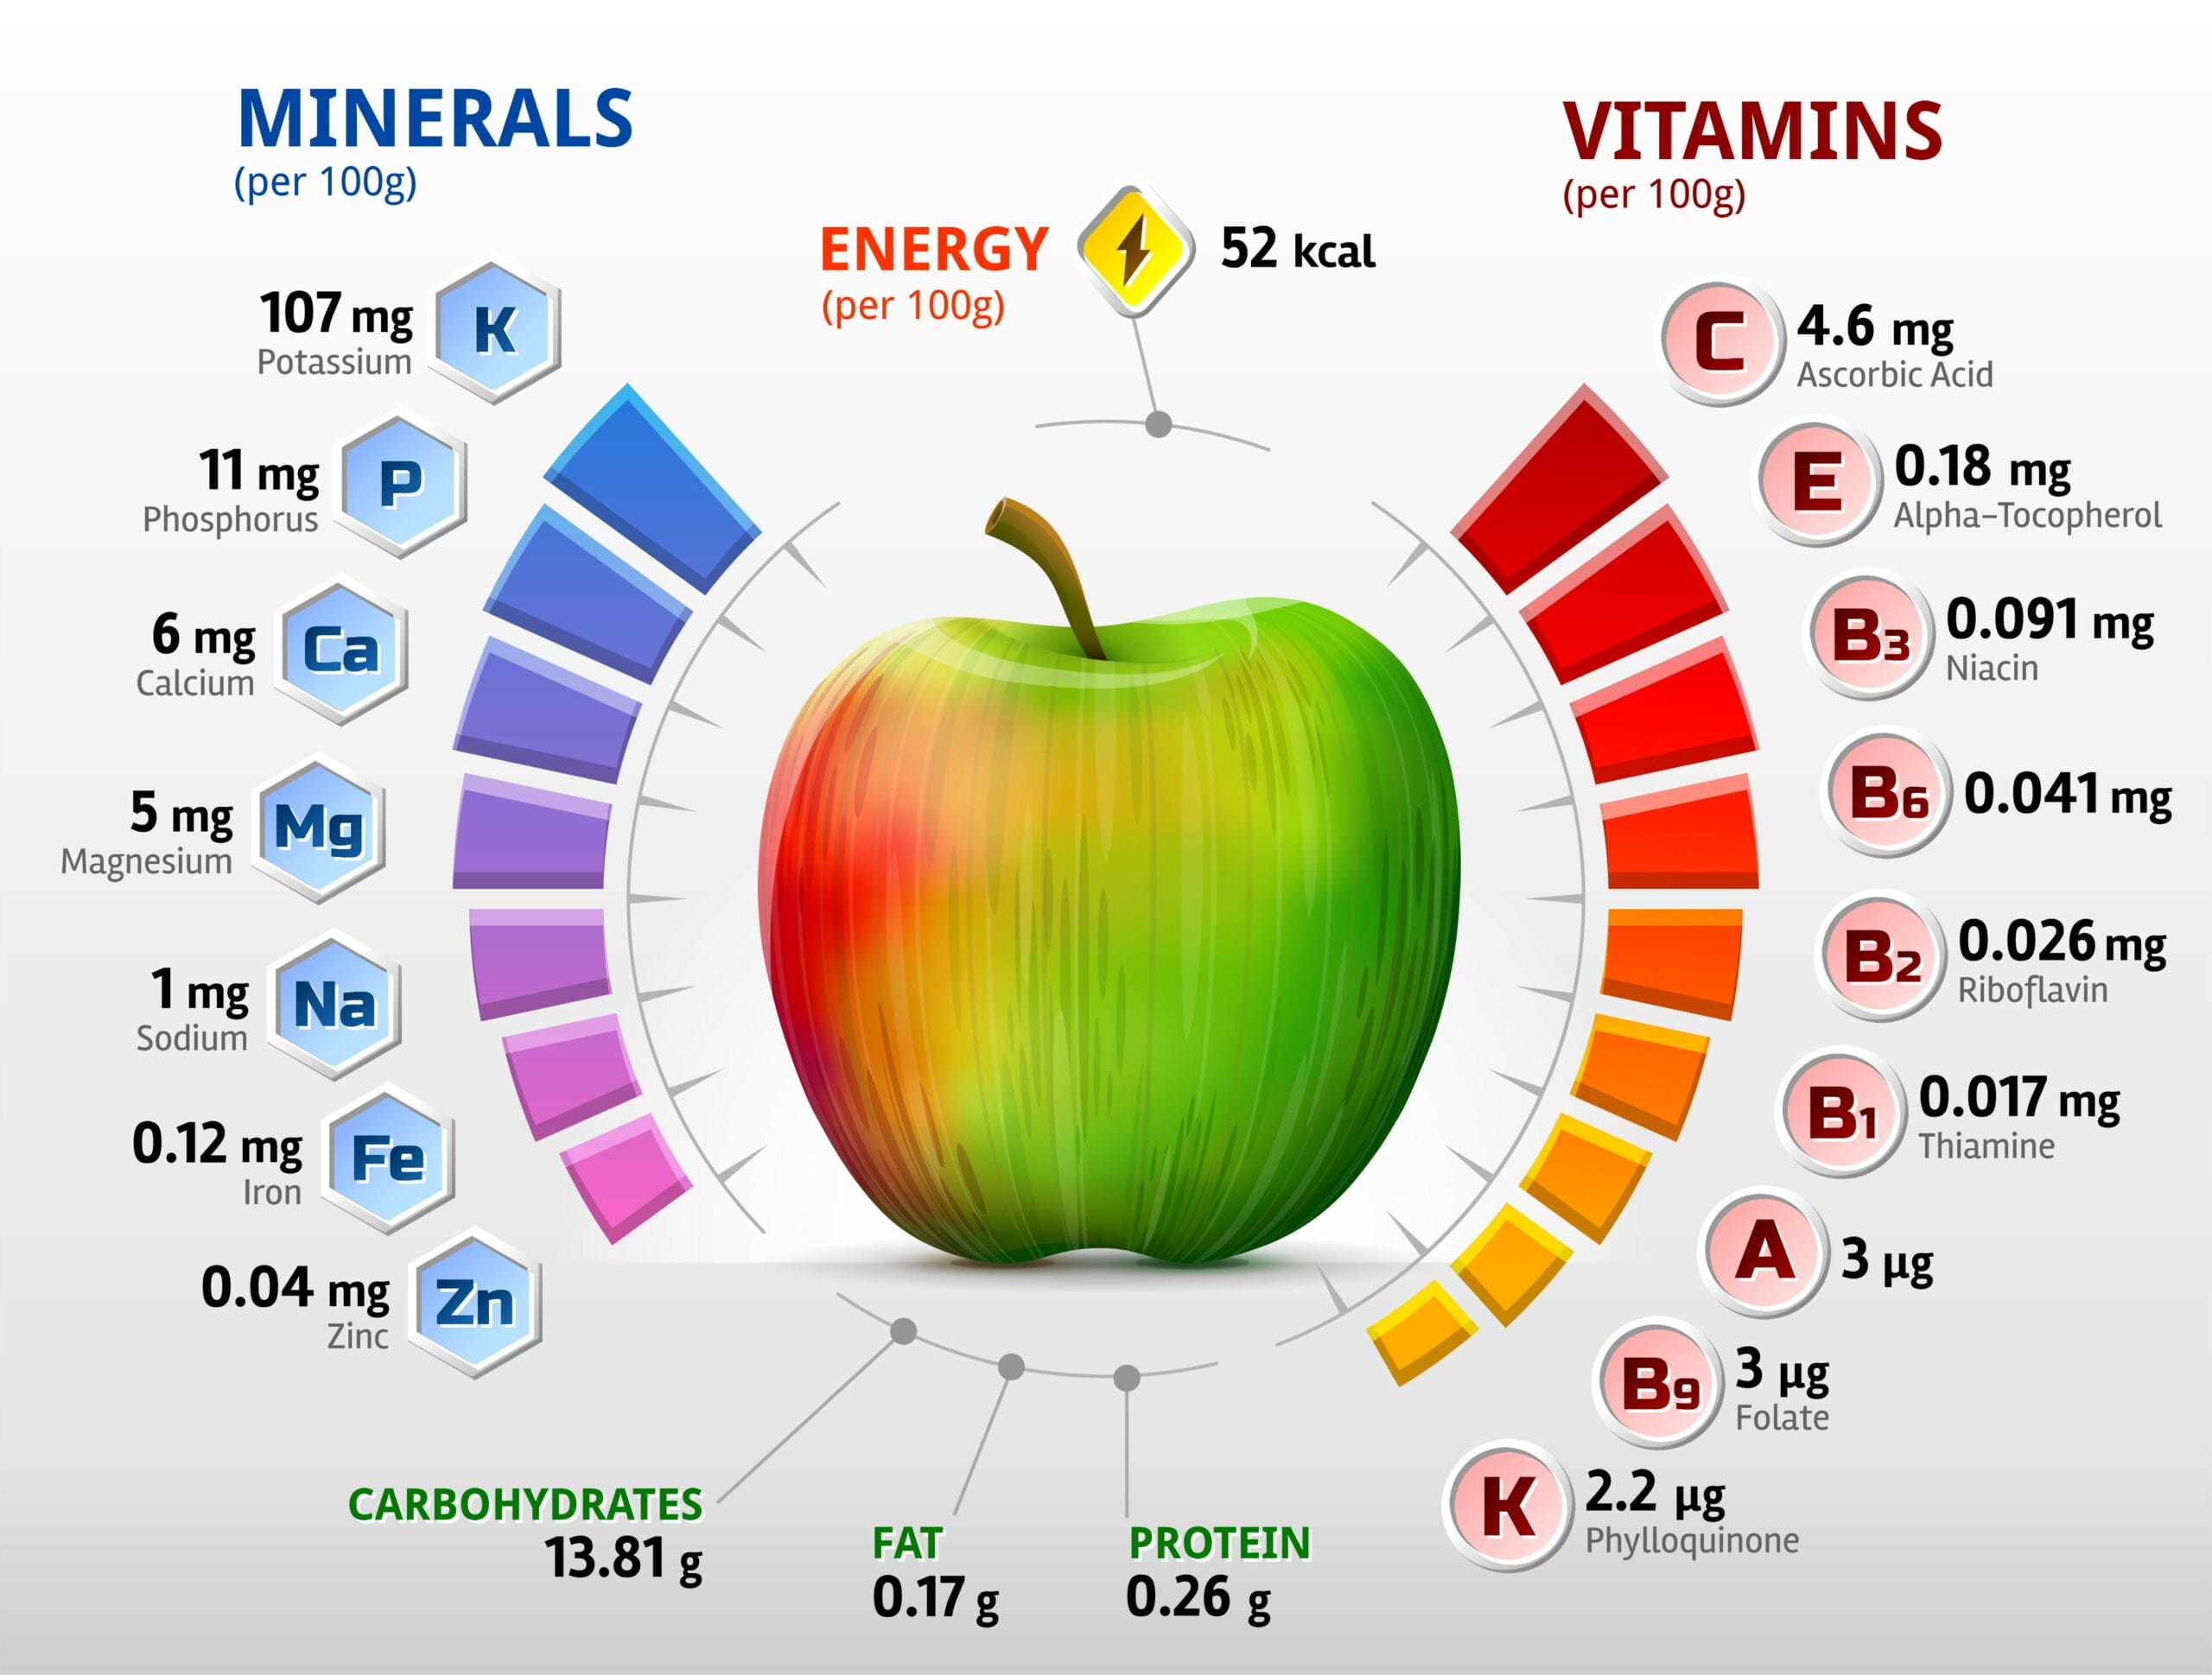 Are All Vitamins And Minerals Completely Necessary?